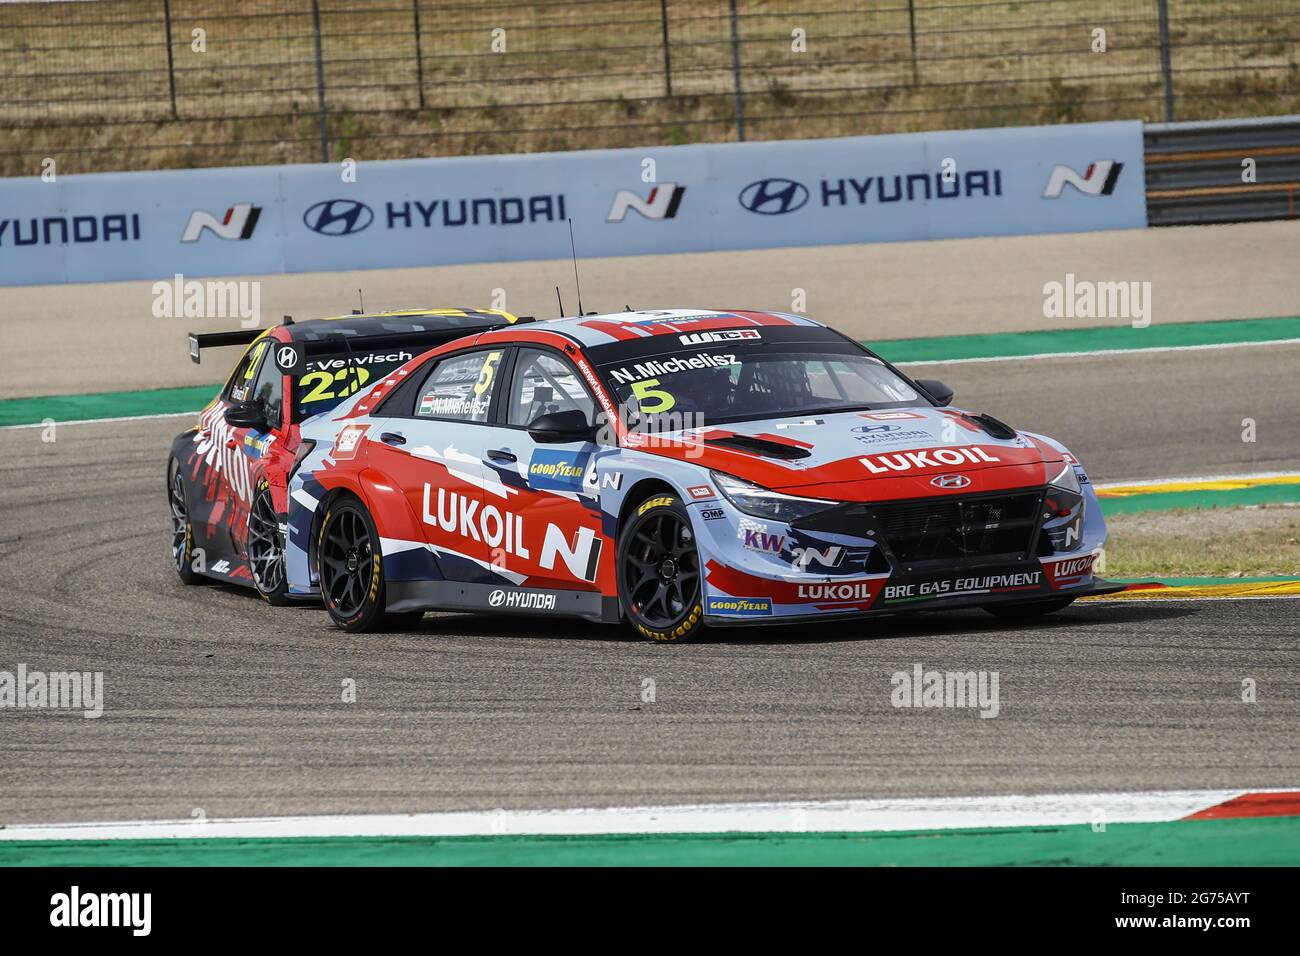 05 Michelisz Norbert (hun), BRC Hyundai N Lukoil Squadra Corse, Hyundai Elantra N TCR, action during the 2021 FIA WTCR Race of Spain, 3rd round of the 2021 FIA World Touring Car Cup, on the Ciudad del Motor de Aragon, from July 10 to 11, 2021 in Alcaniz, Spain - Photo Xavi Bonilla / DPPI Stock Photo